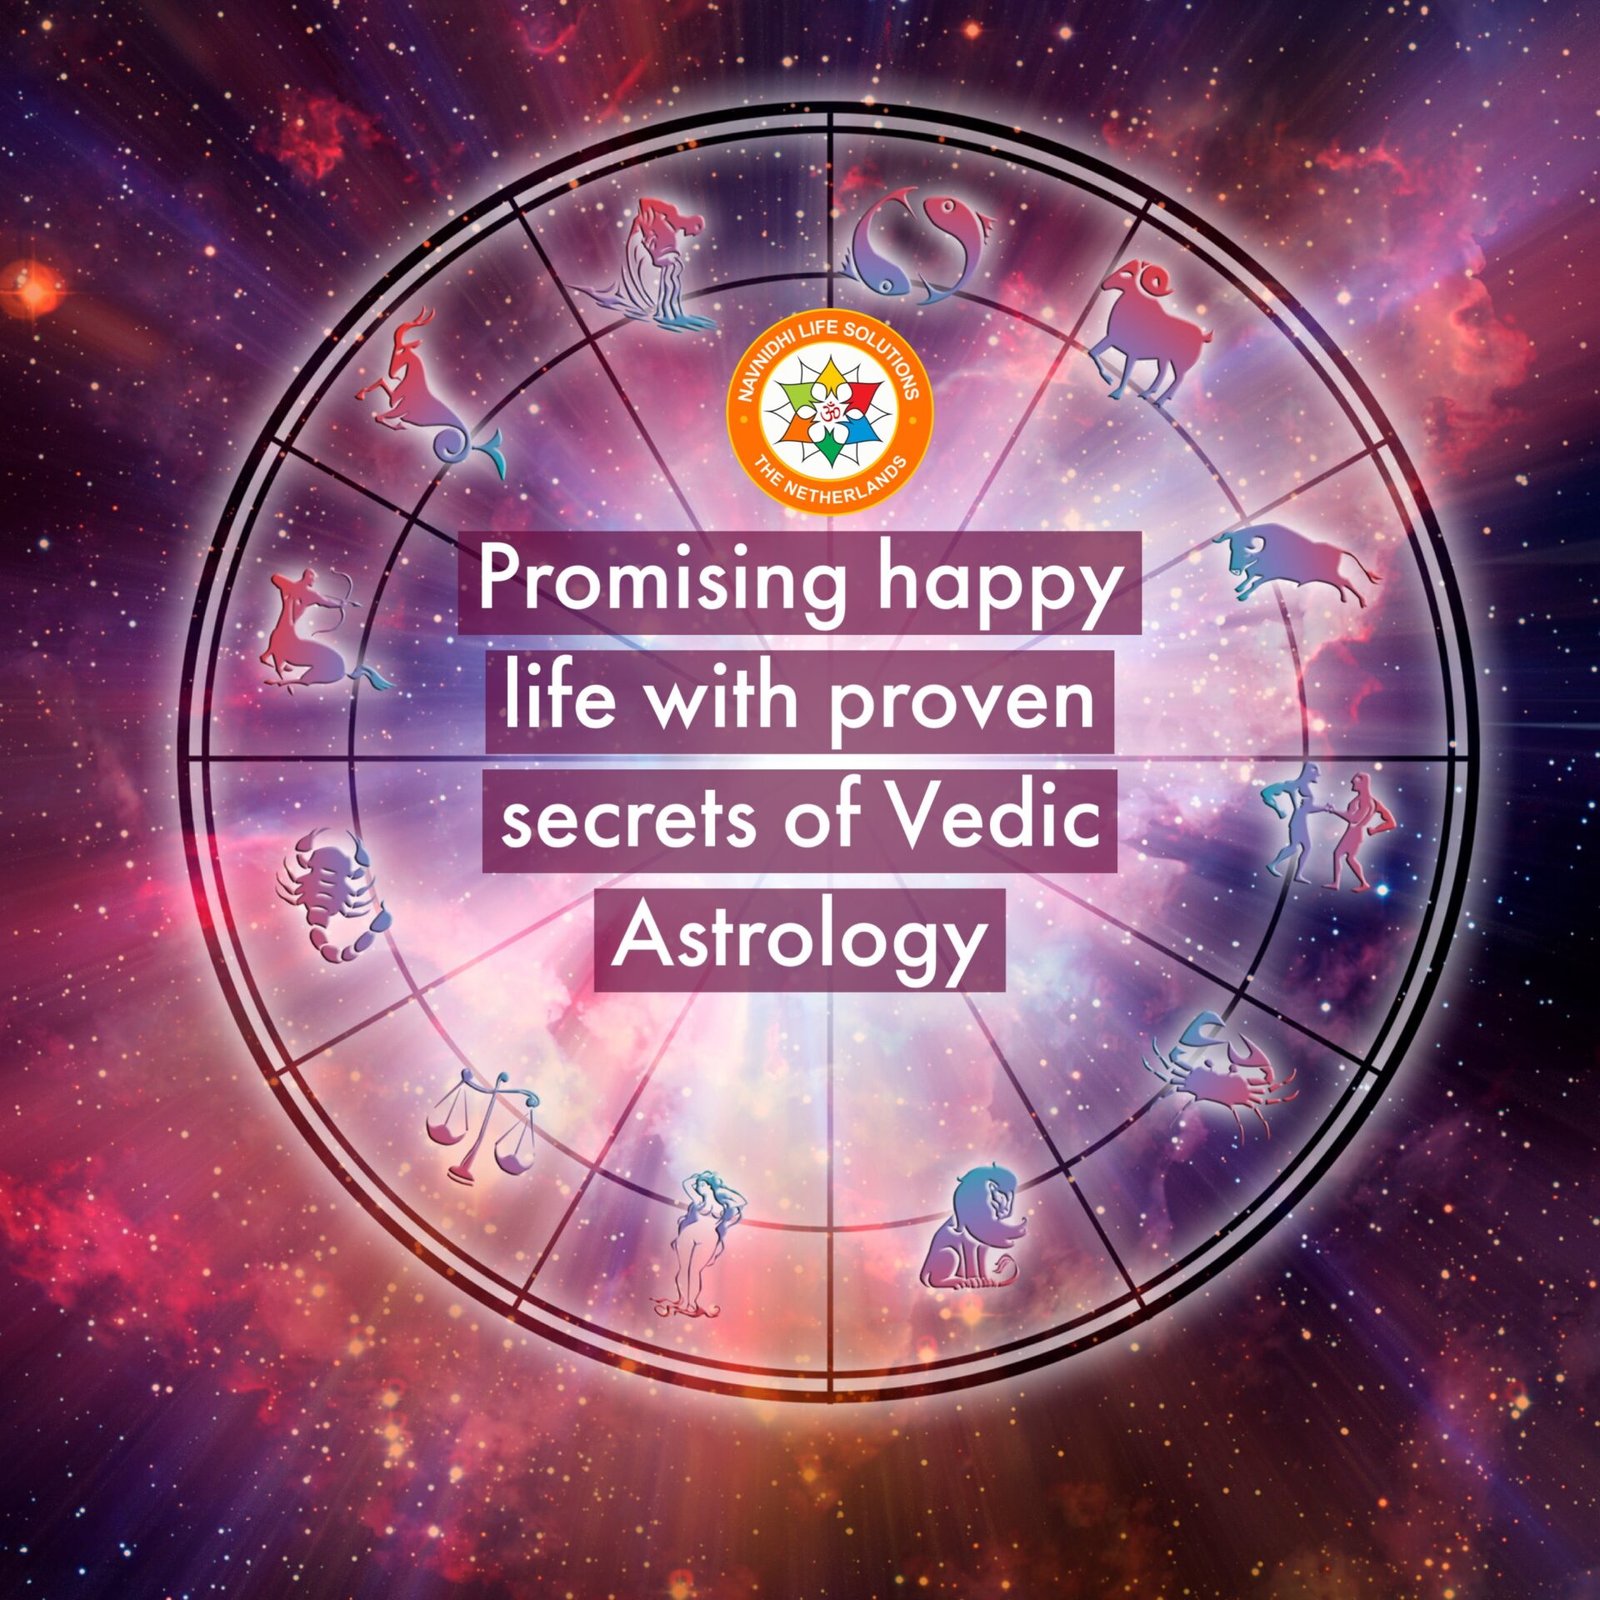 Vedic Astrology Company in Netherlands Registered in KvK The Hague Horoscope